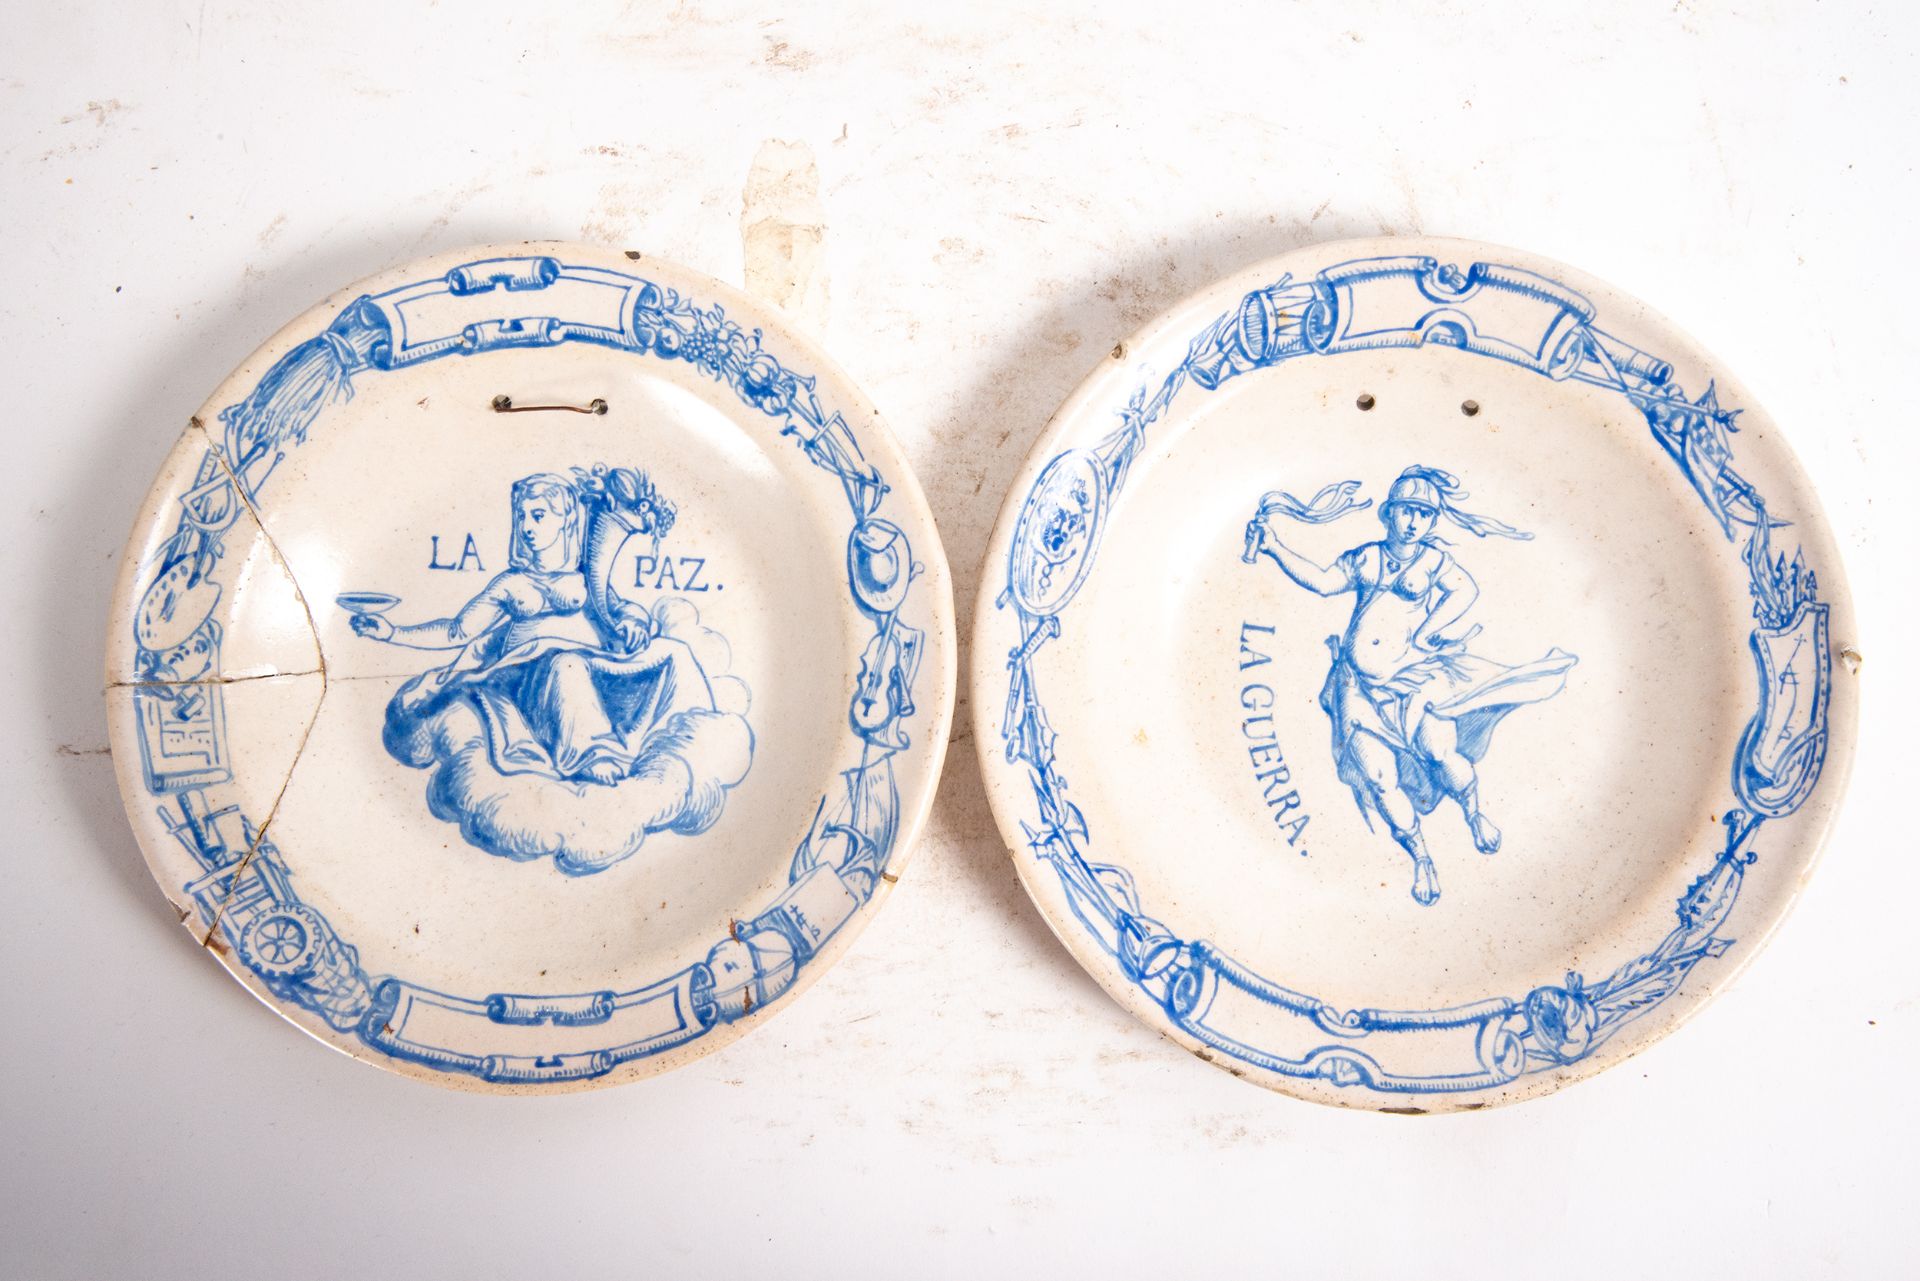 Pair of Plates from "War and Peace", Talavera, late 18th century